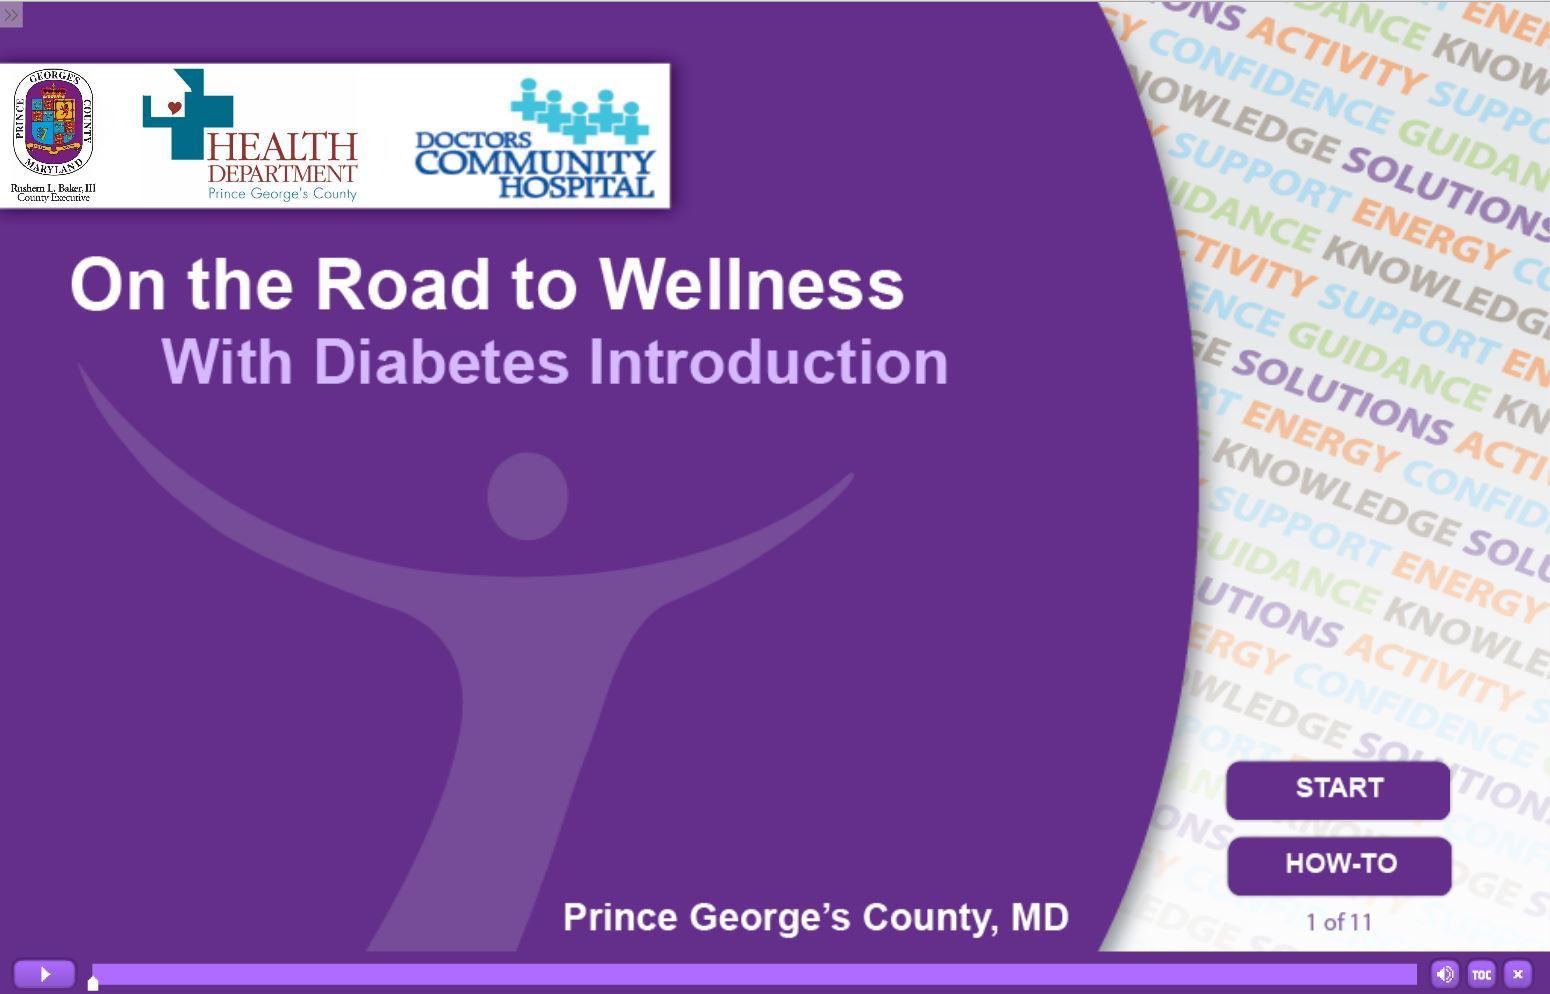 On the Road to Wellness Video Introduction